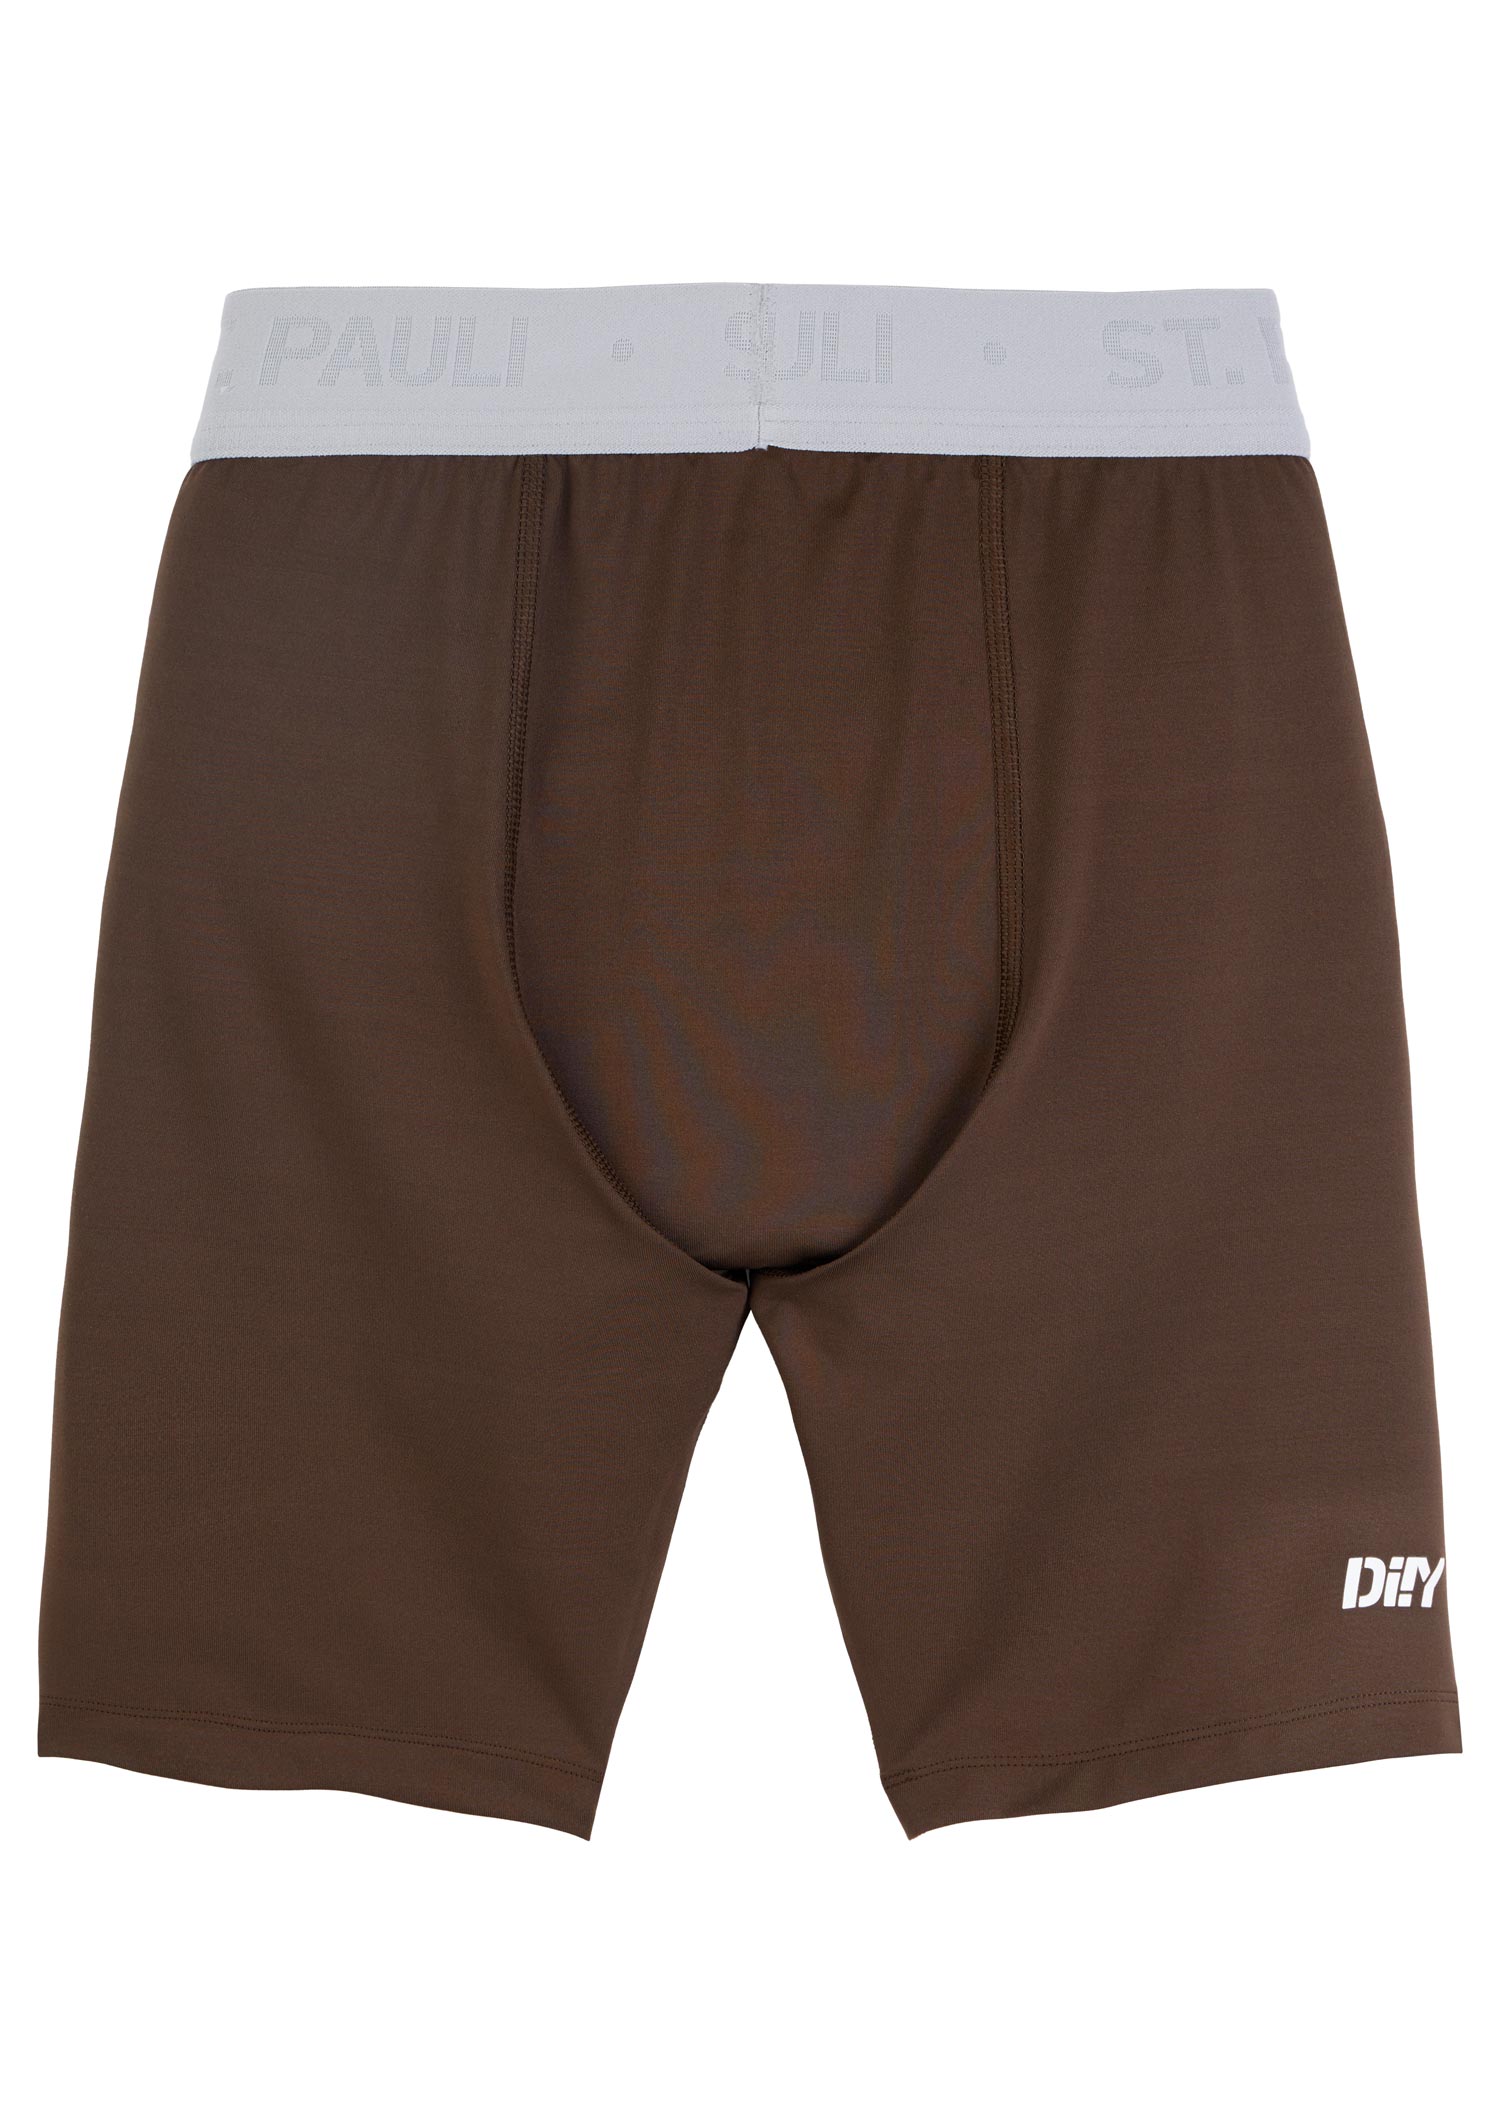 DIIY - Compression Shorts Home